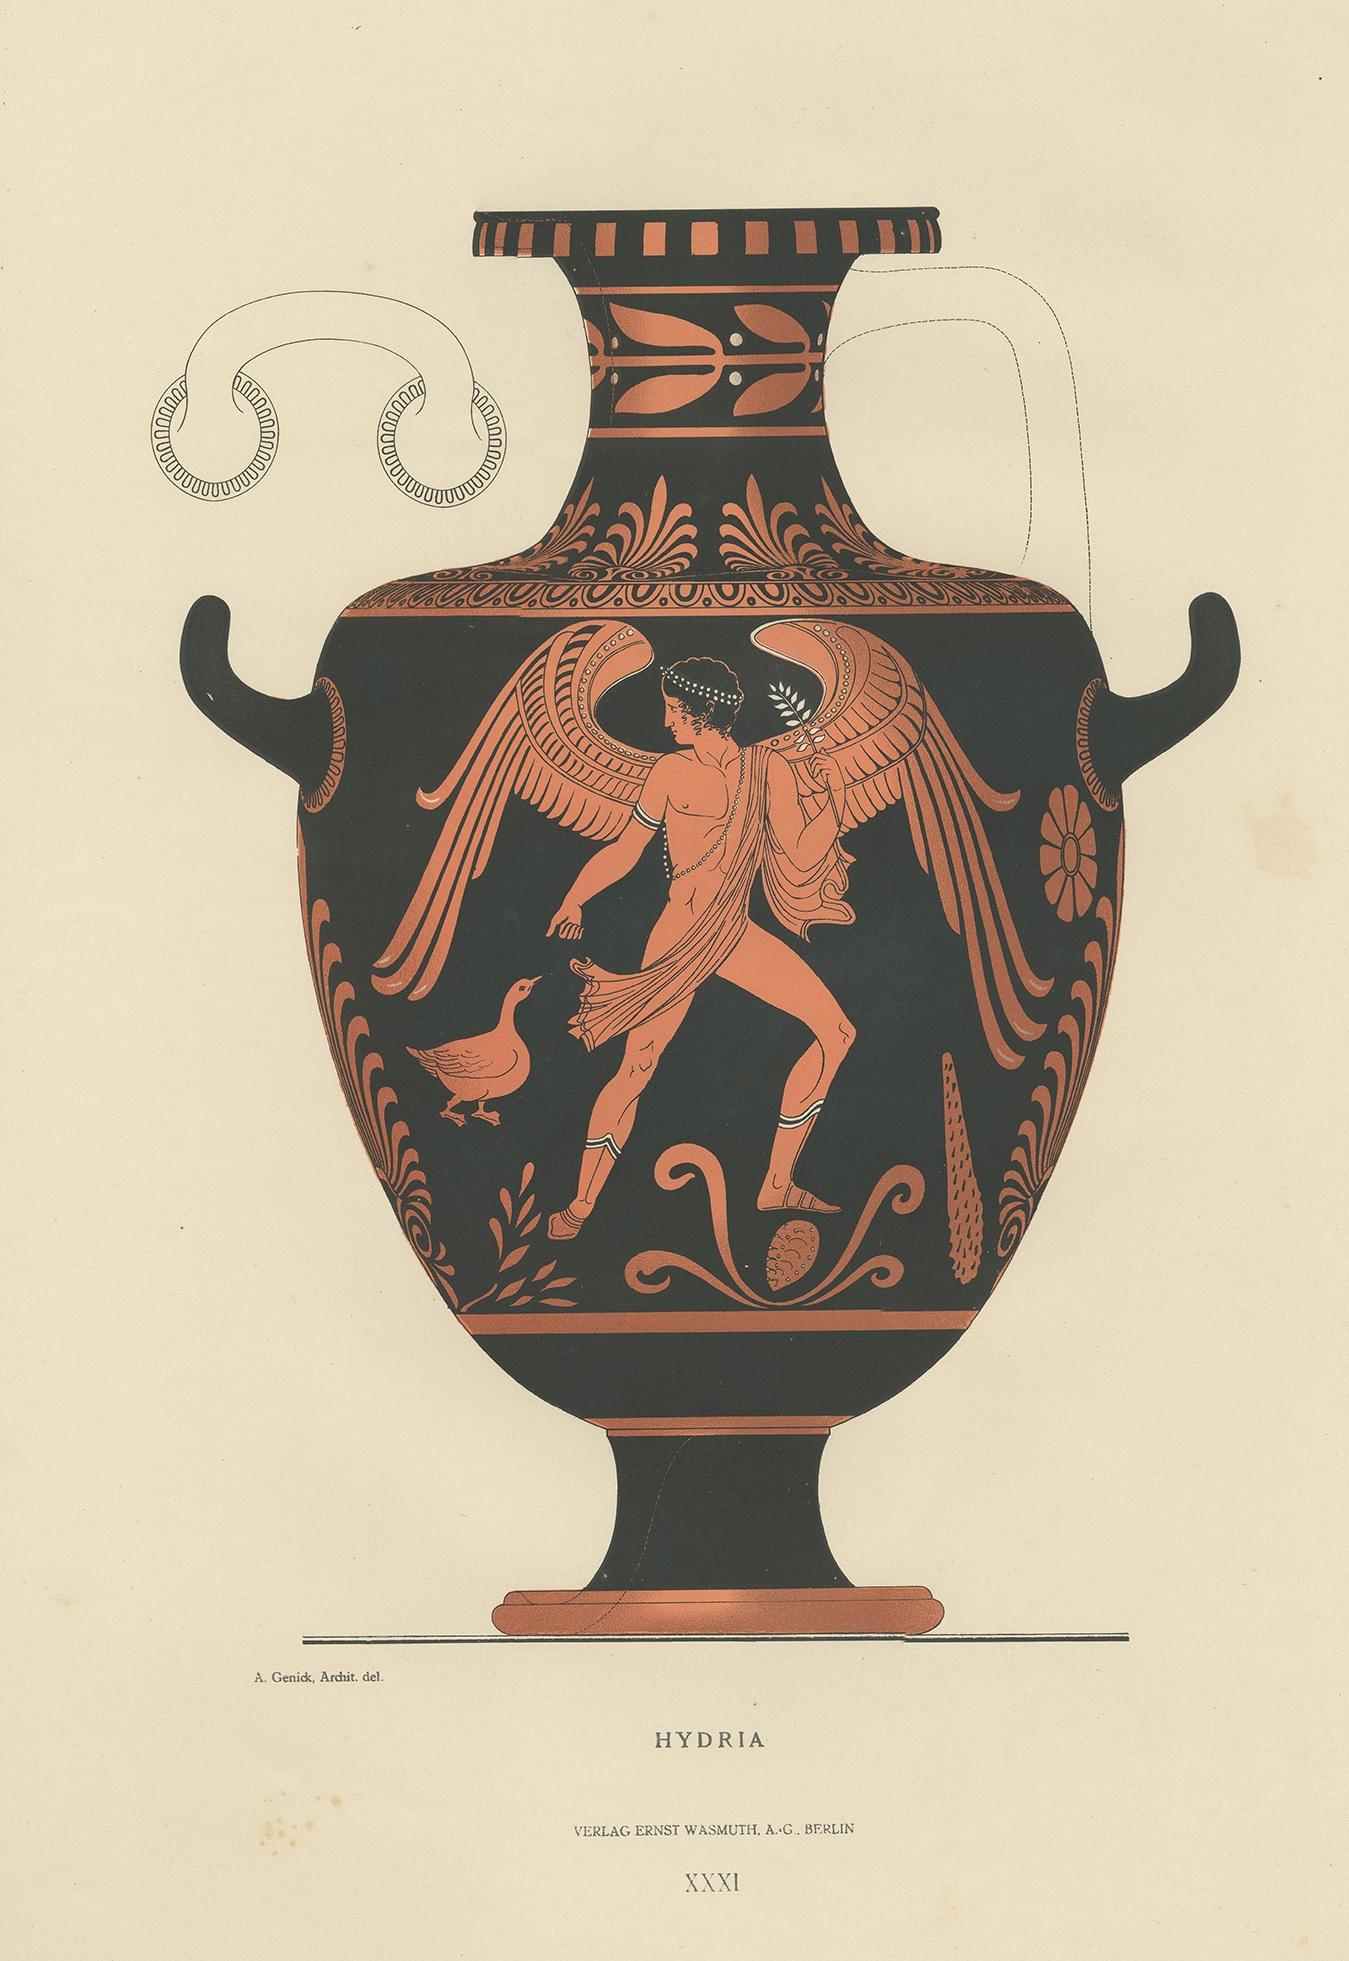 Antique print titled 'Hydria'. Colour-printed large lithograph by Ernst Wasmuth depicting a Greek hydria (water jar). A is a type of water-carrying vessel in the metalwork and pottery of Ancient Greece. The hydria has three handles. Two horizontal